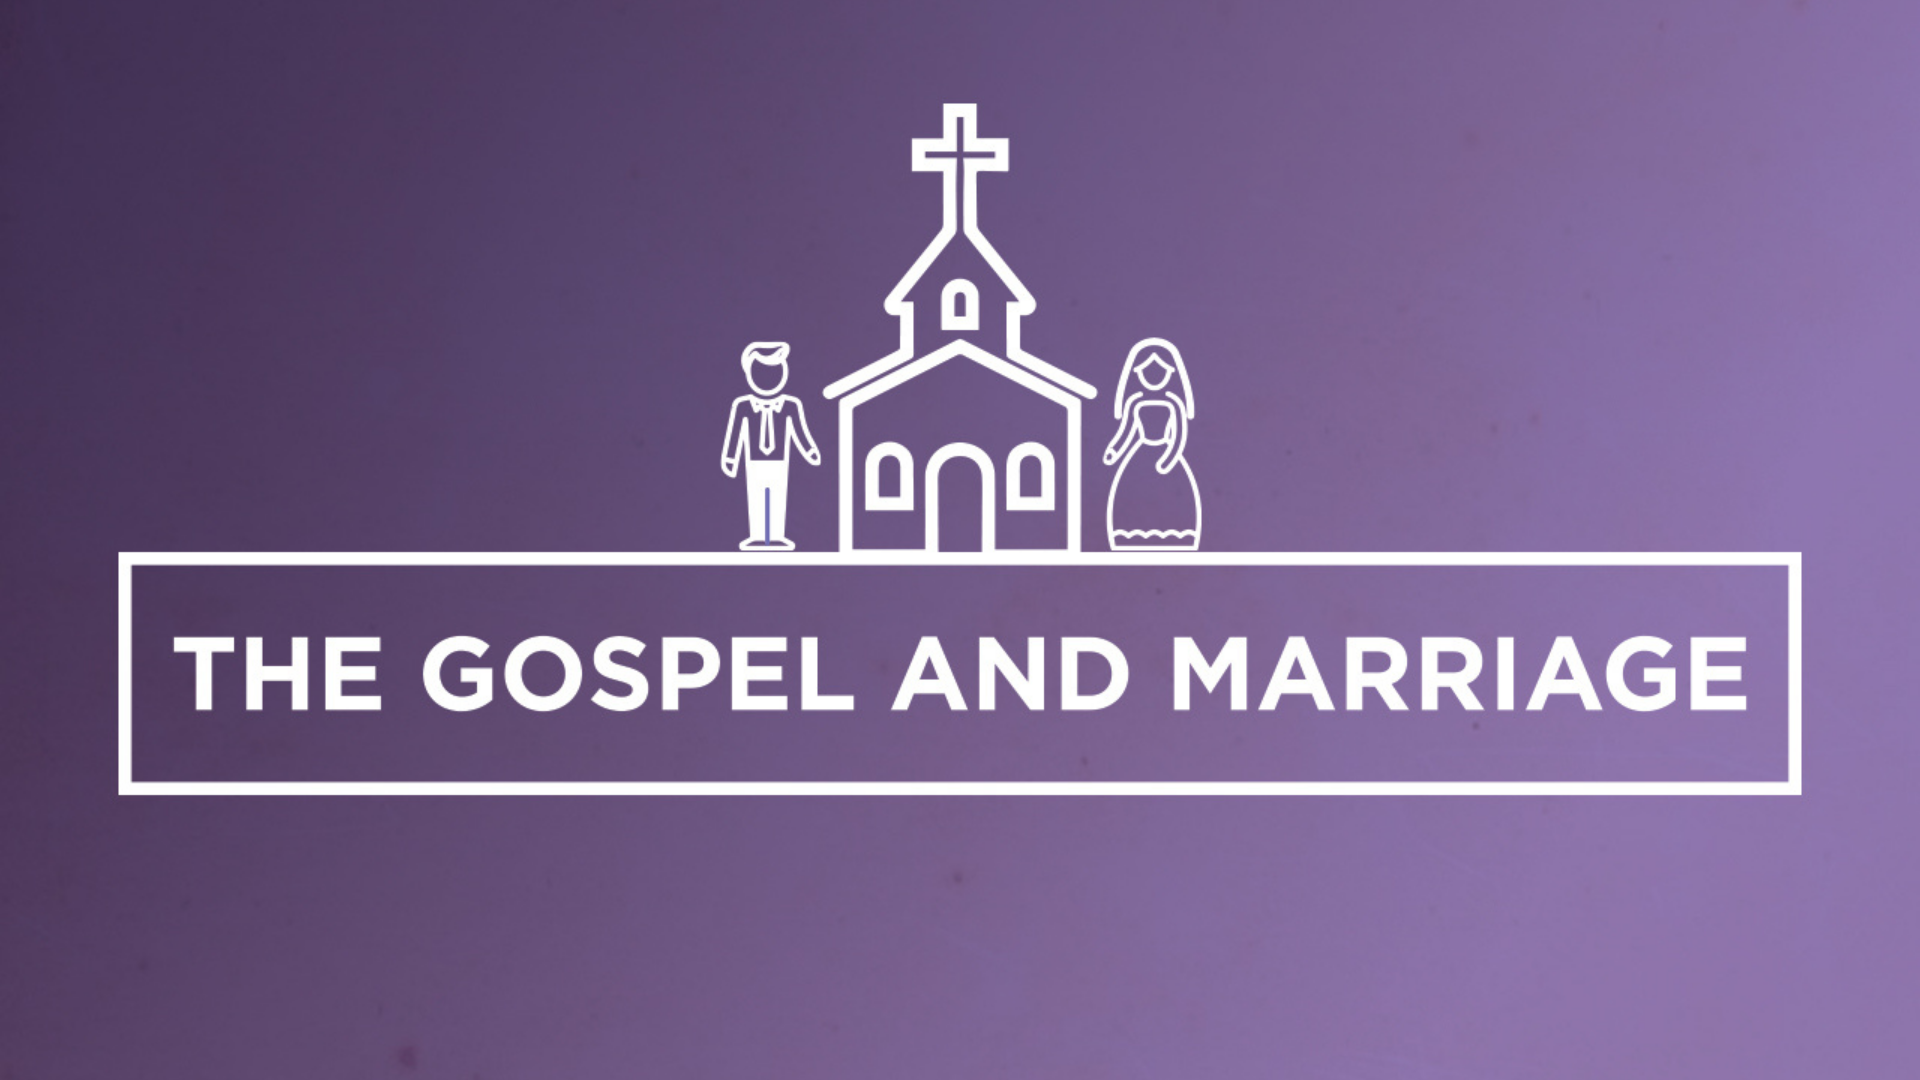 The Gospel and Marriage